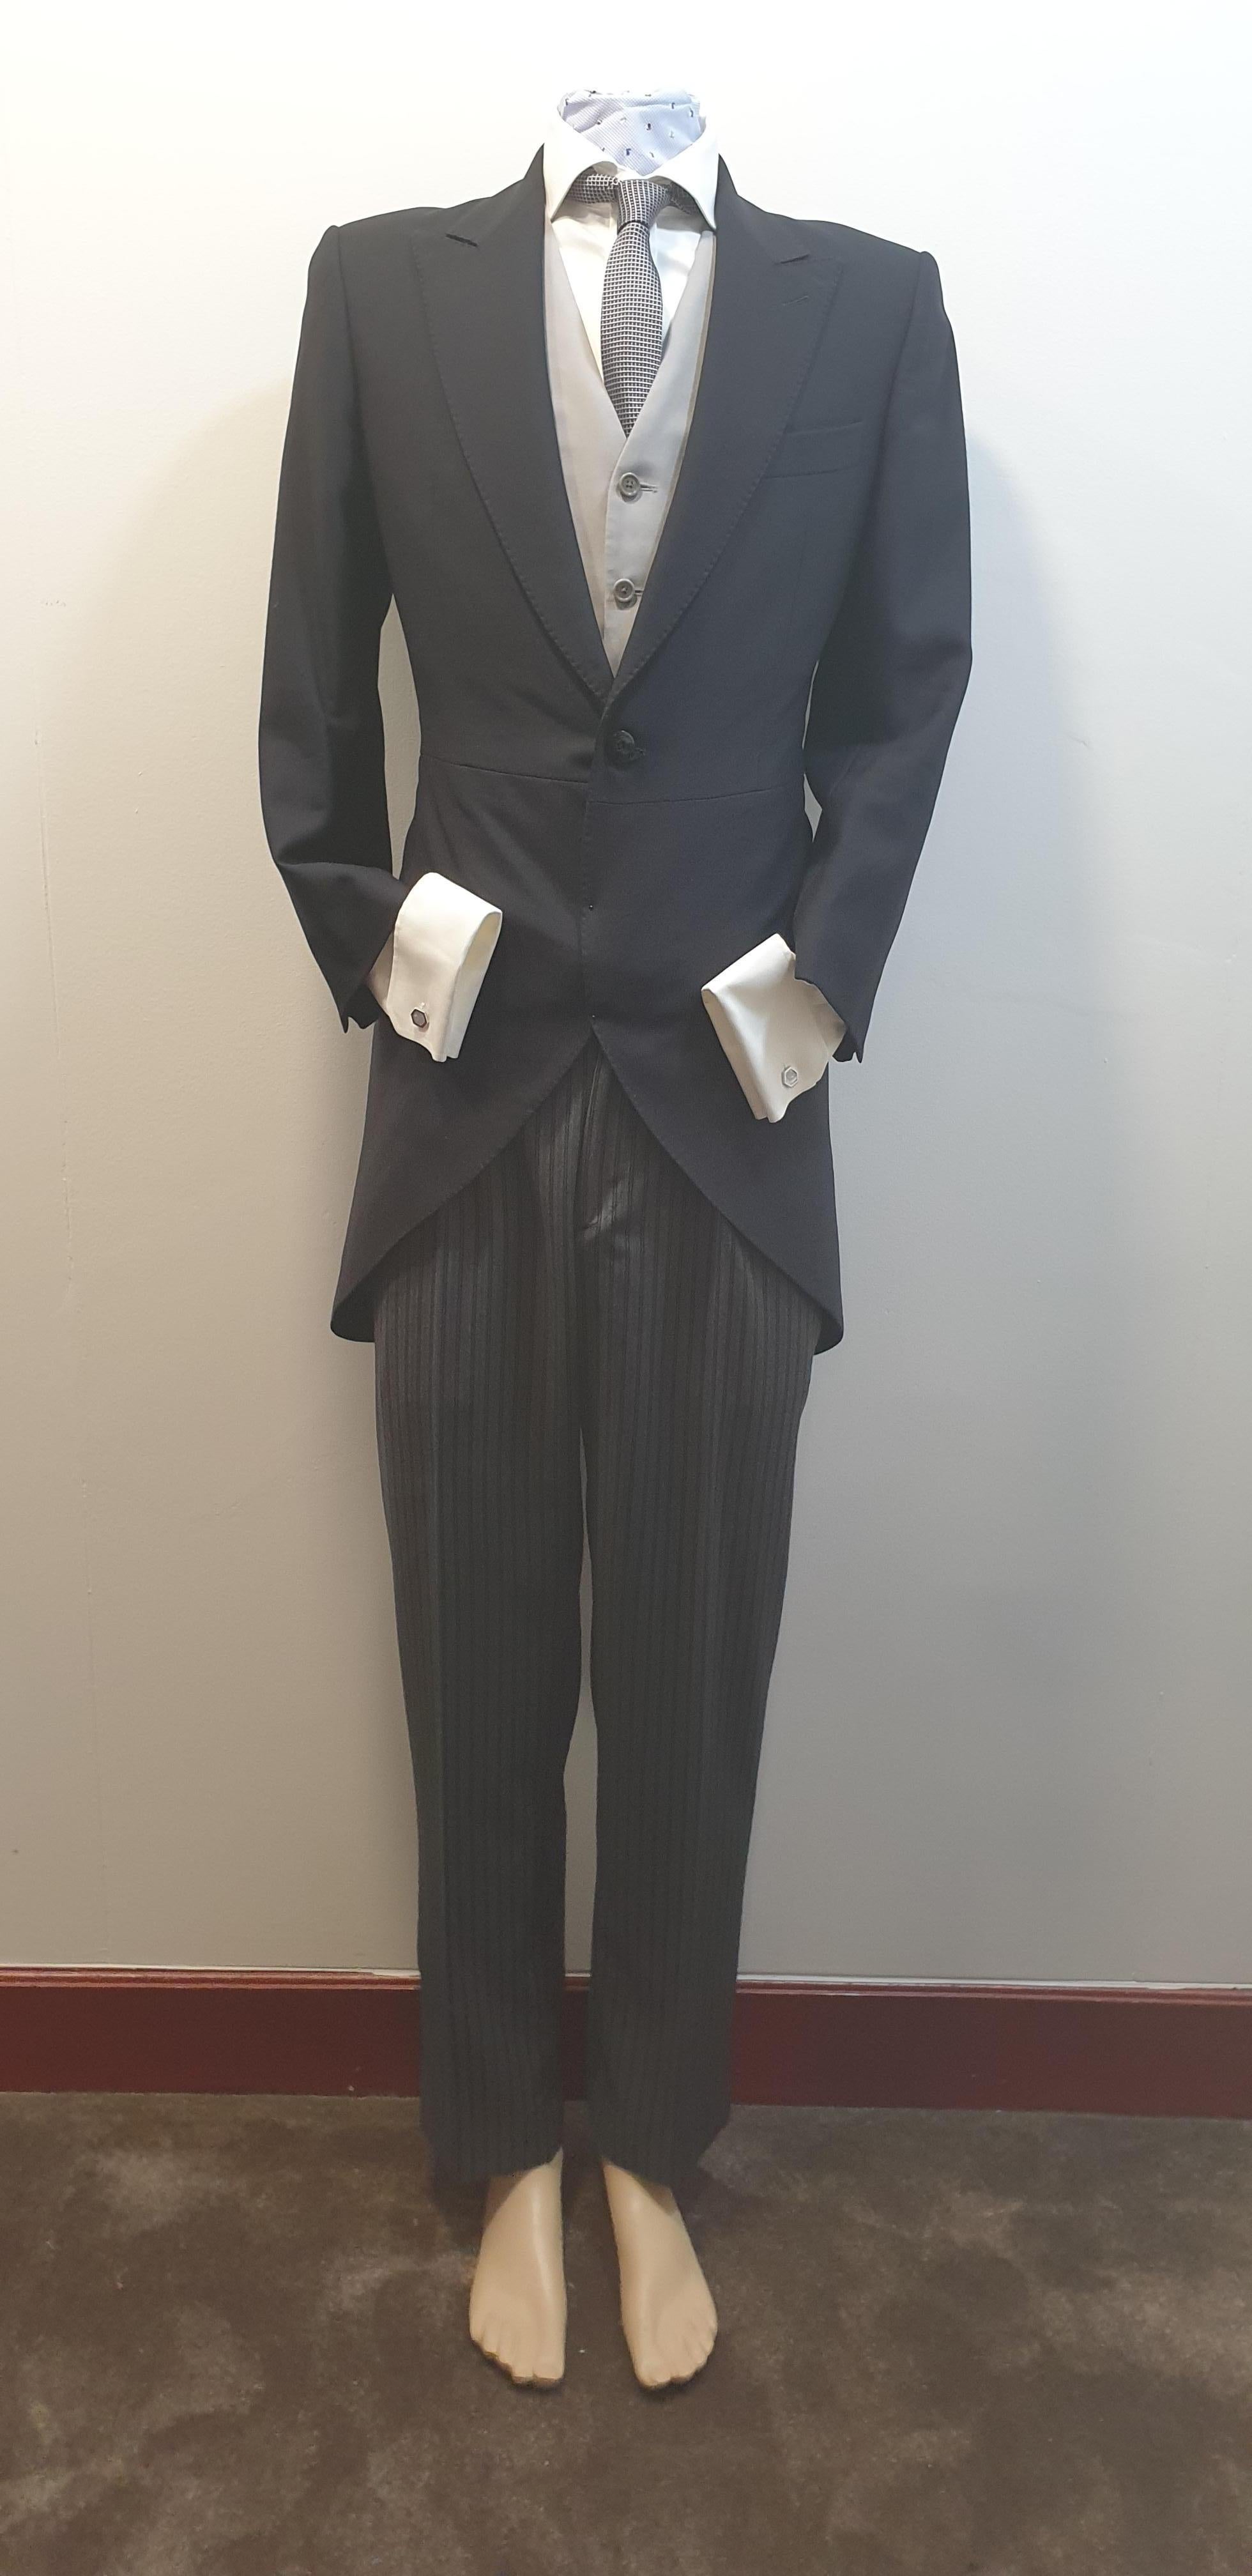 Bespoke black wedding morning suit  by Derby Bilbao
Consisting on long chaqué jacket, vest, cuff link blouse, tie, suspenders  and trousers 
Perfect Condition Only used Once 
Size 14 US
48 Spain
READY TO SHIP
*Shipment of this piece is not affected